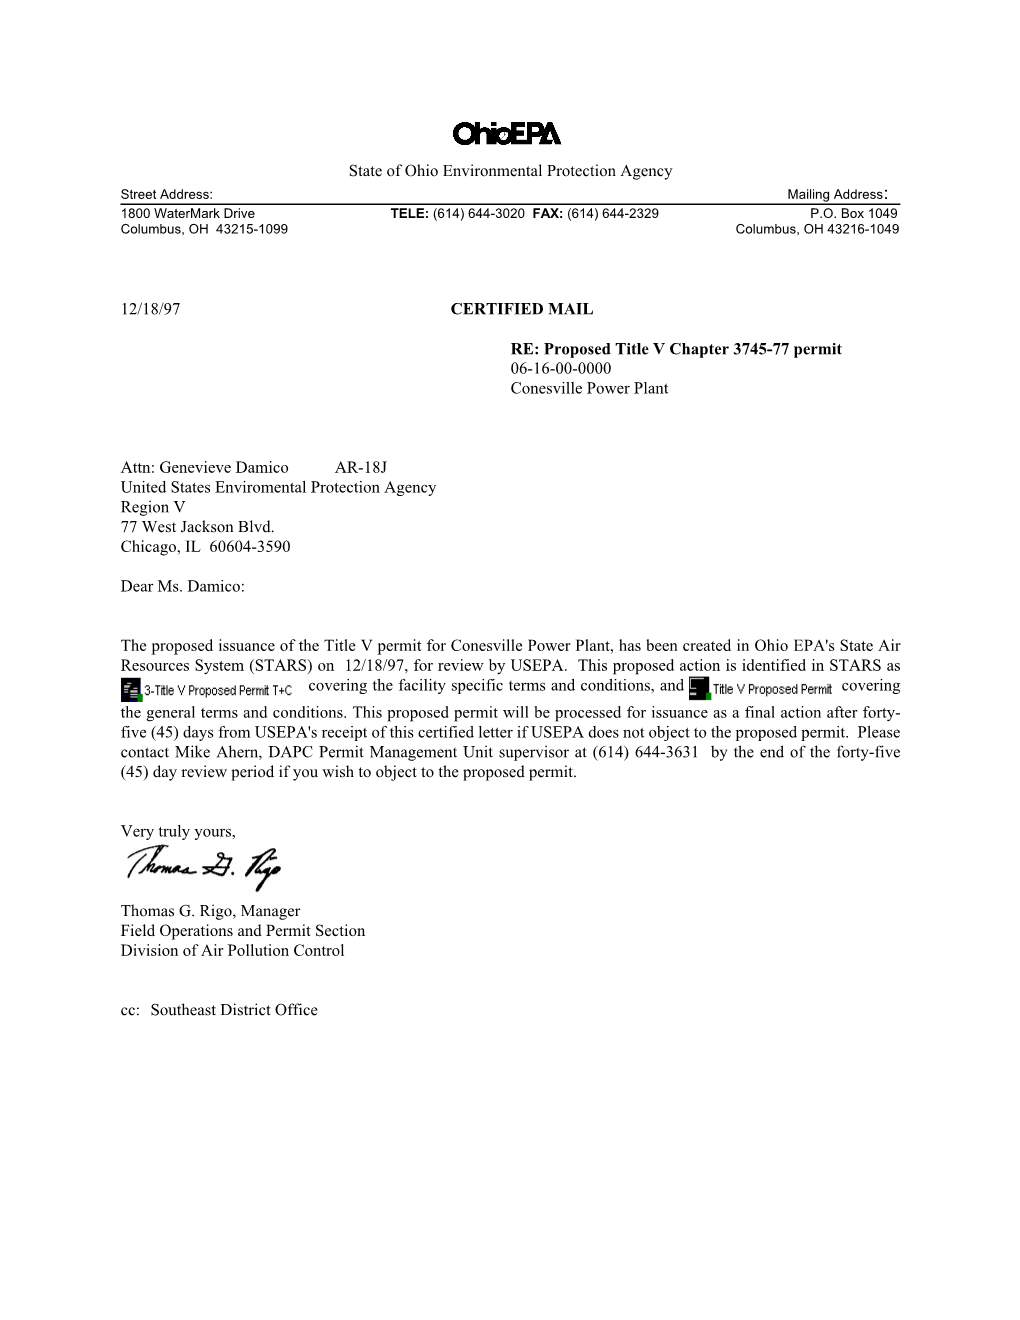 Proposed Title V Chapter 3745-77 Permit 06-16-00-0000 Conesville Power Plant